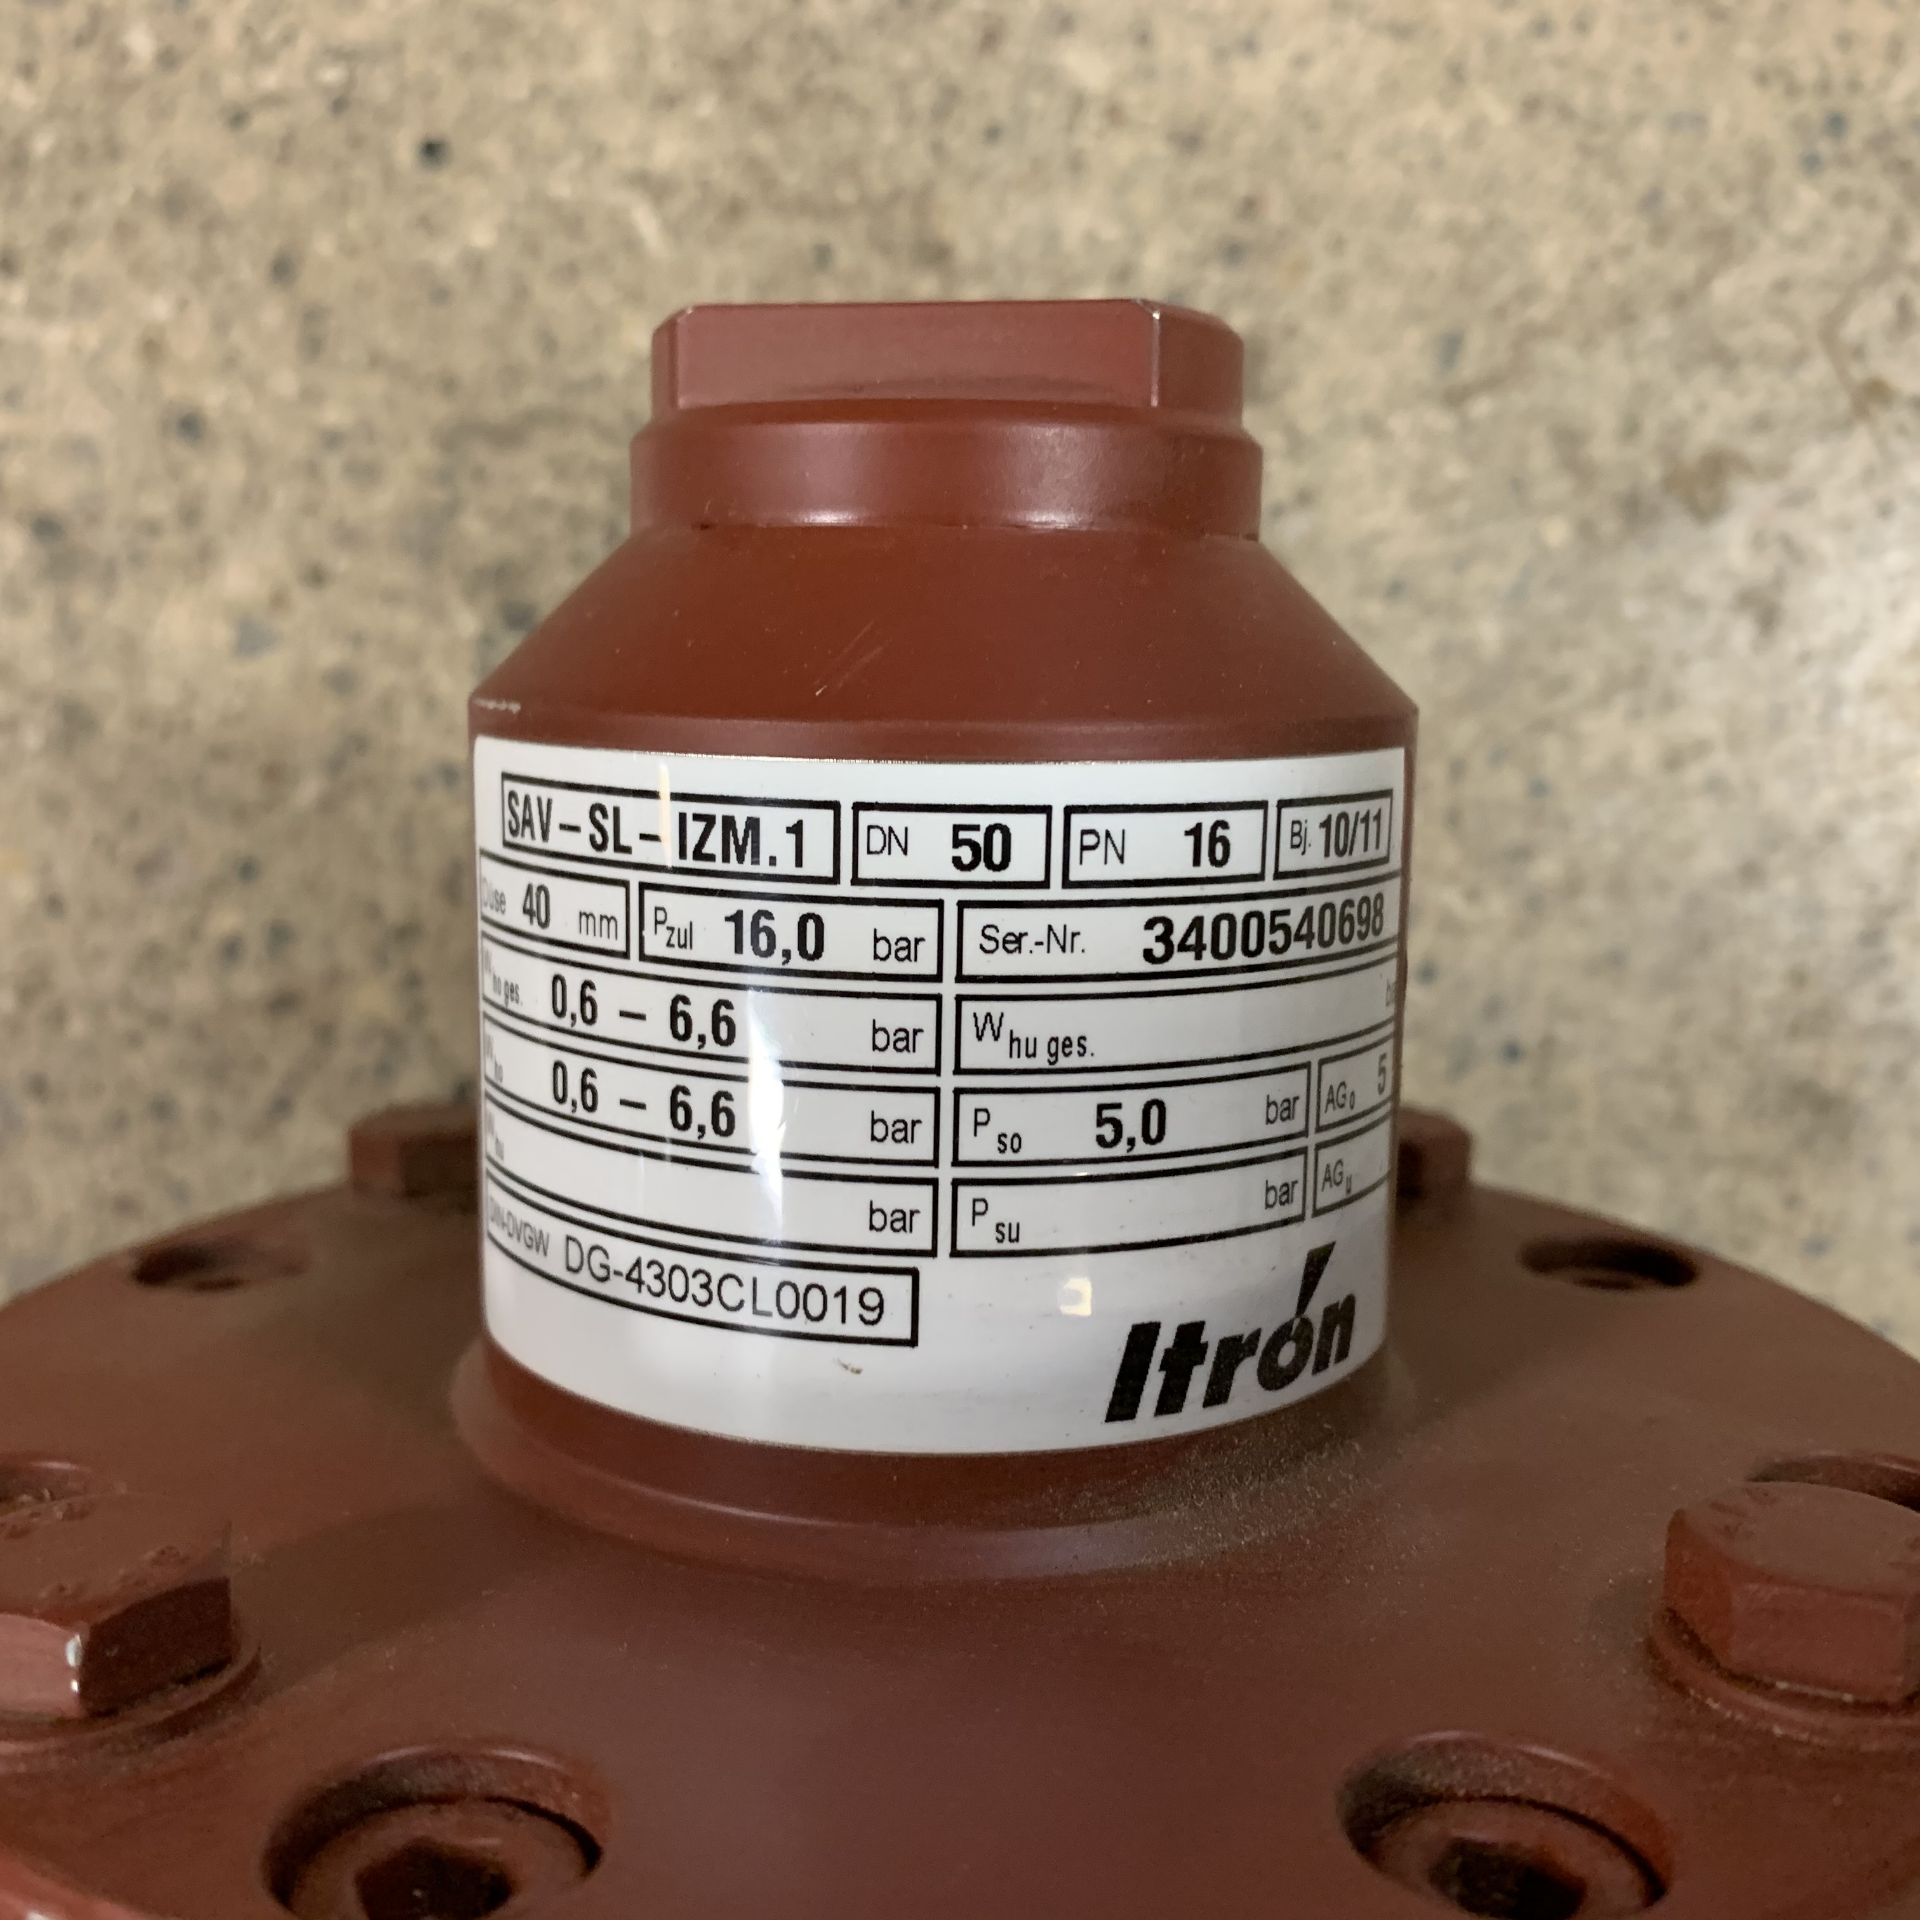 NEW OUT OF BOX - ITRON GAS METERING PUMP DG-4303CL0019 (SAV-SL-IZM.1) - Image 2 of 6